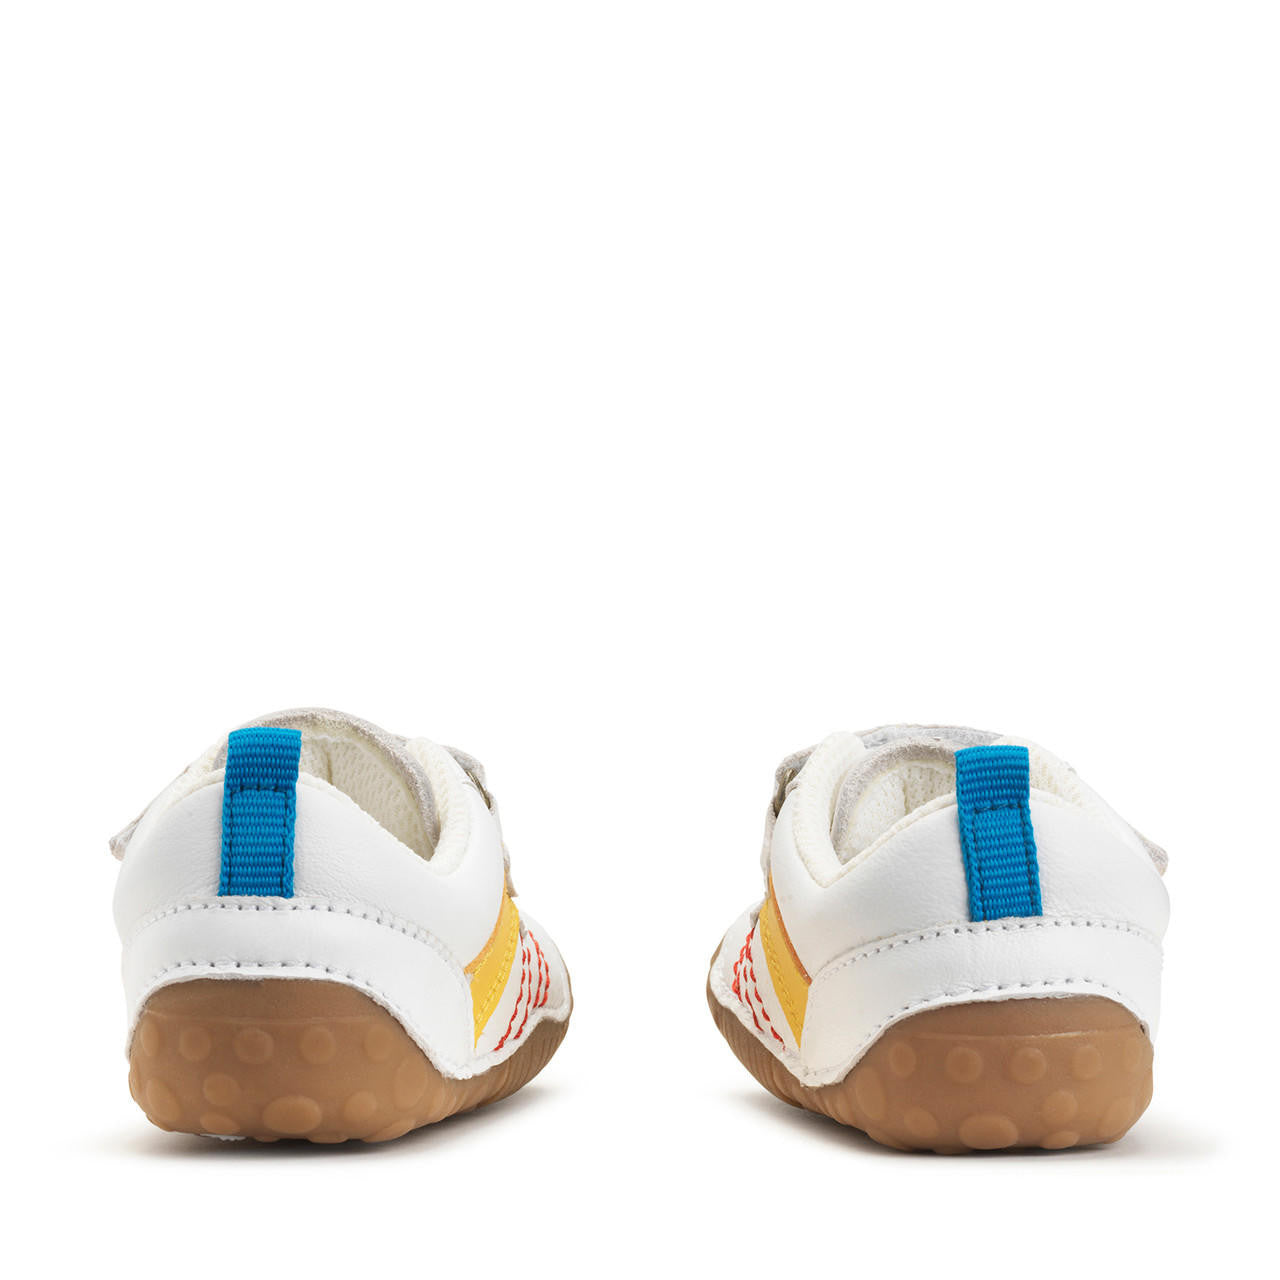 StartRite Little Smile 0823_4 White Leather Touch Fastening Shoes